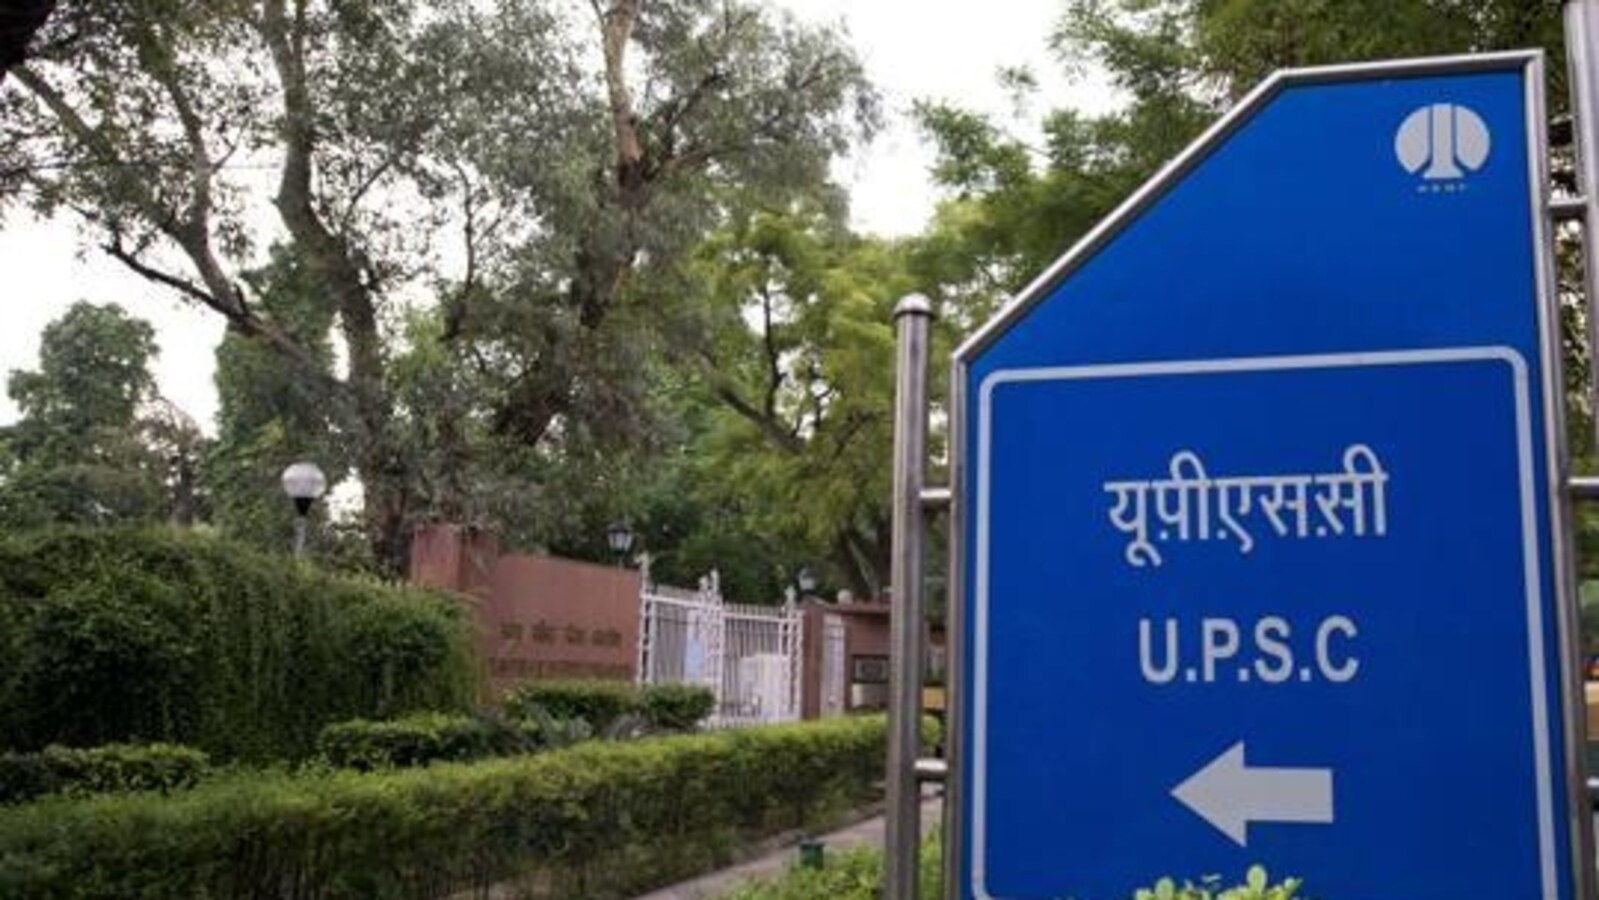 UPSC Engineering Services (Main) exam 2022 time table released, check here